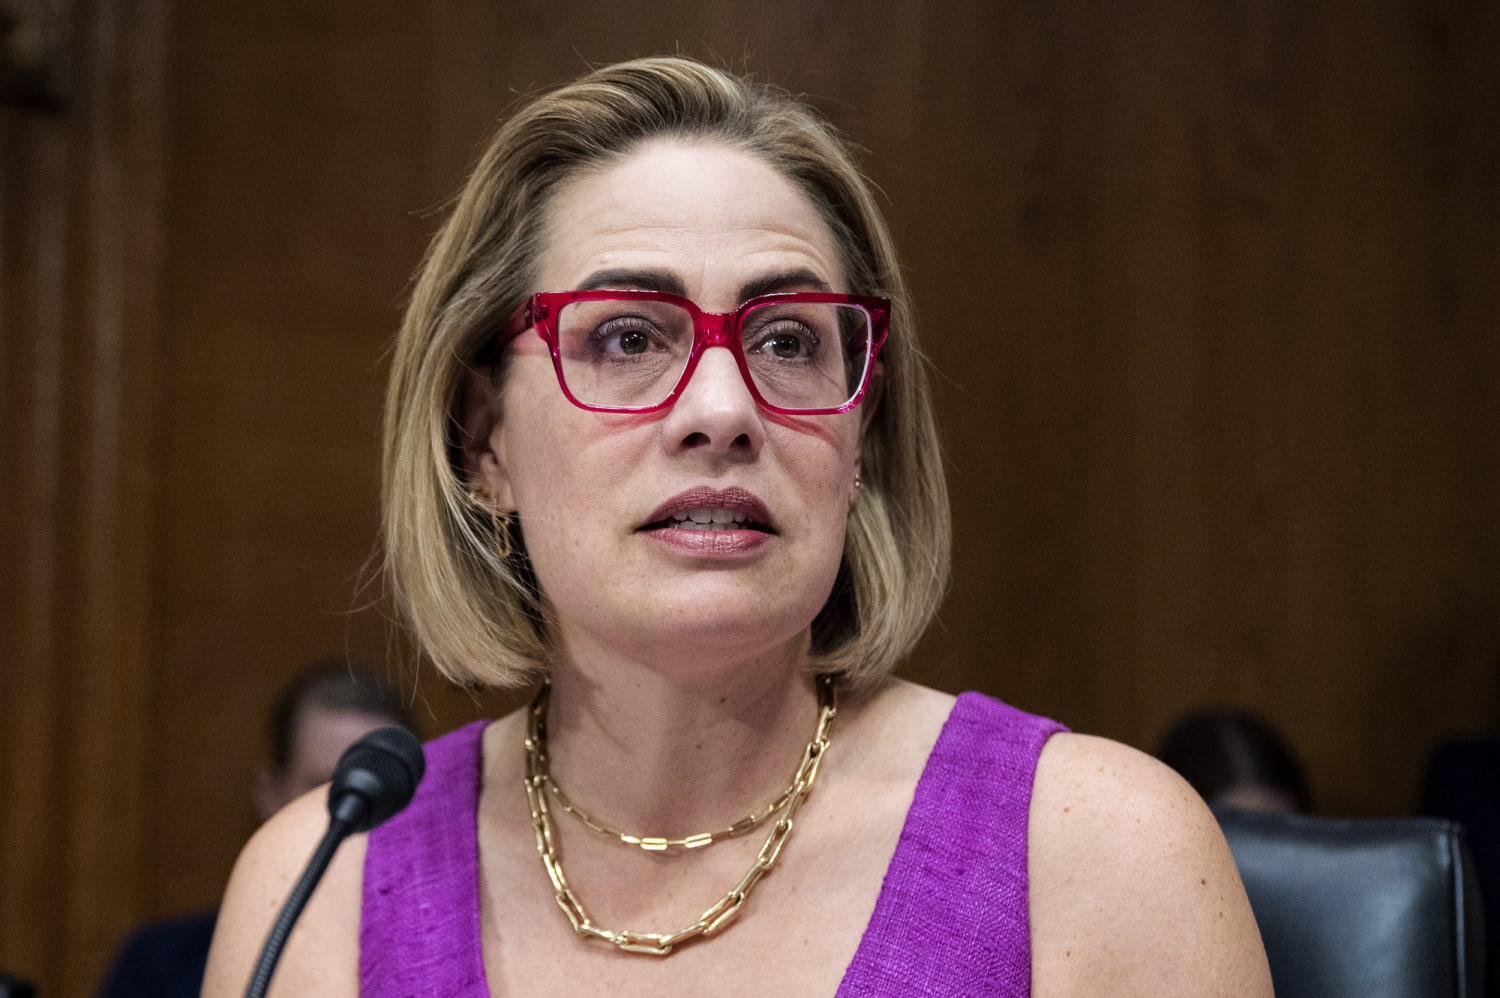 Kyrsten Sinema calls for Biden admin and Tommy Tuberville to find ‘middle ground’ in abortion standoff